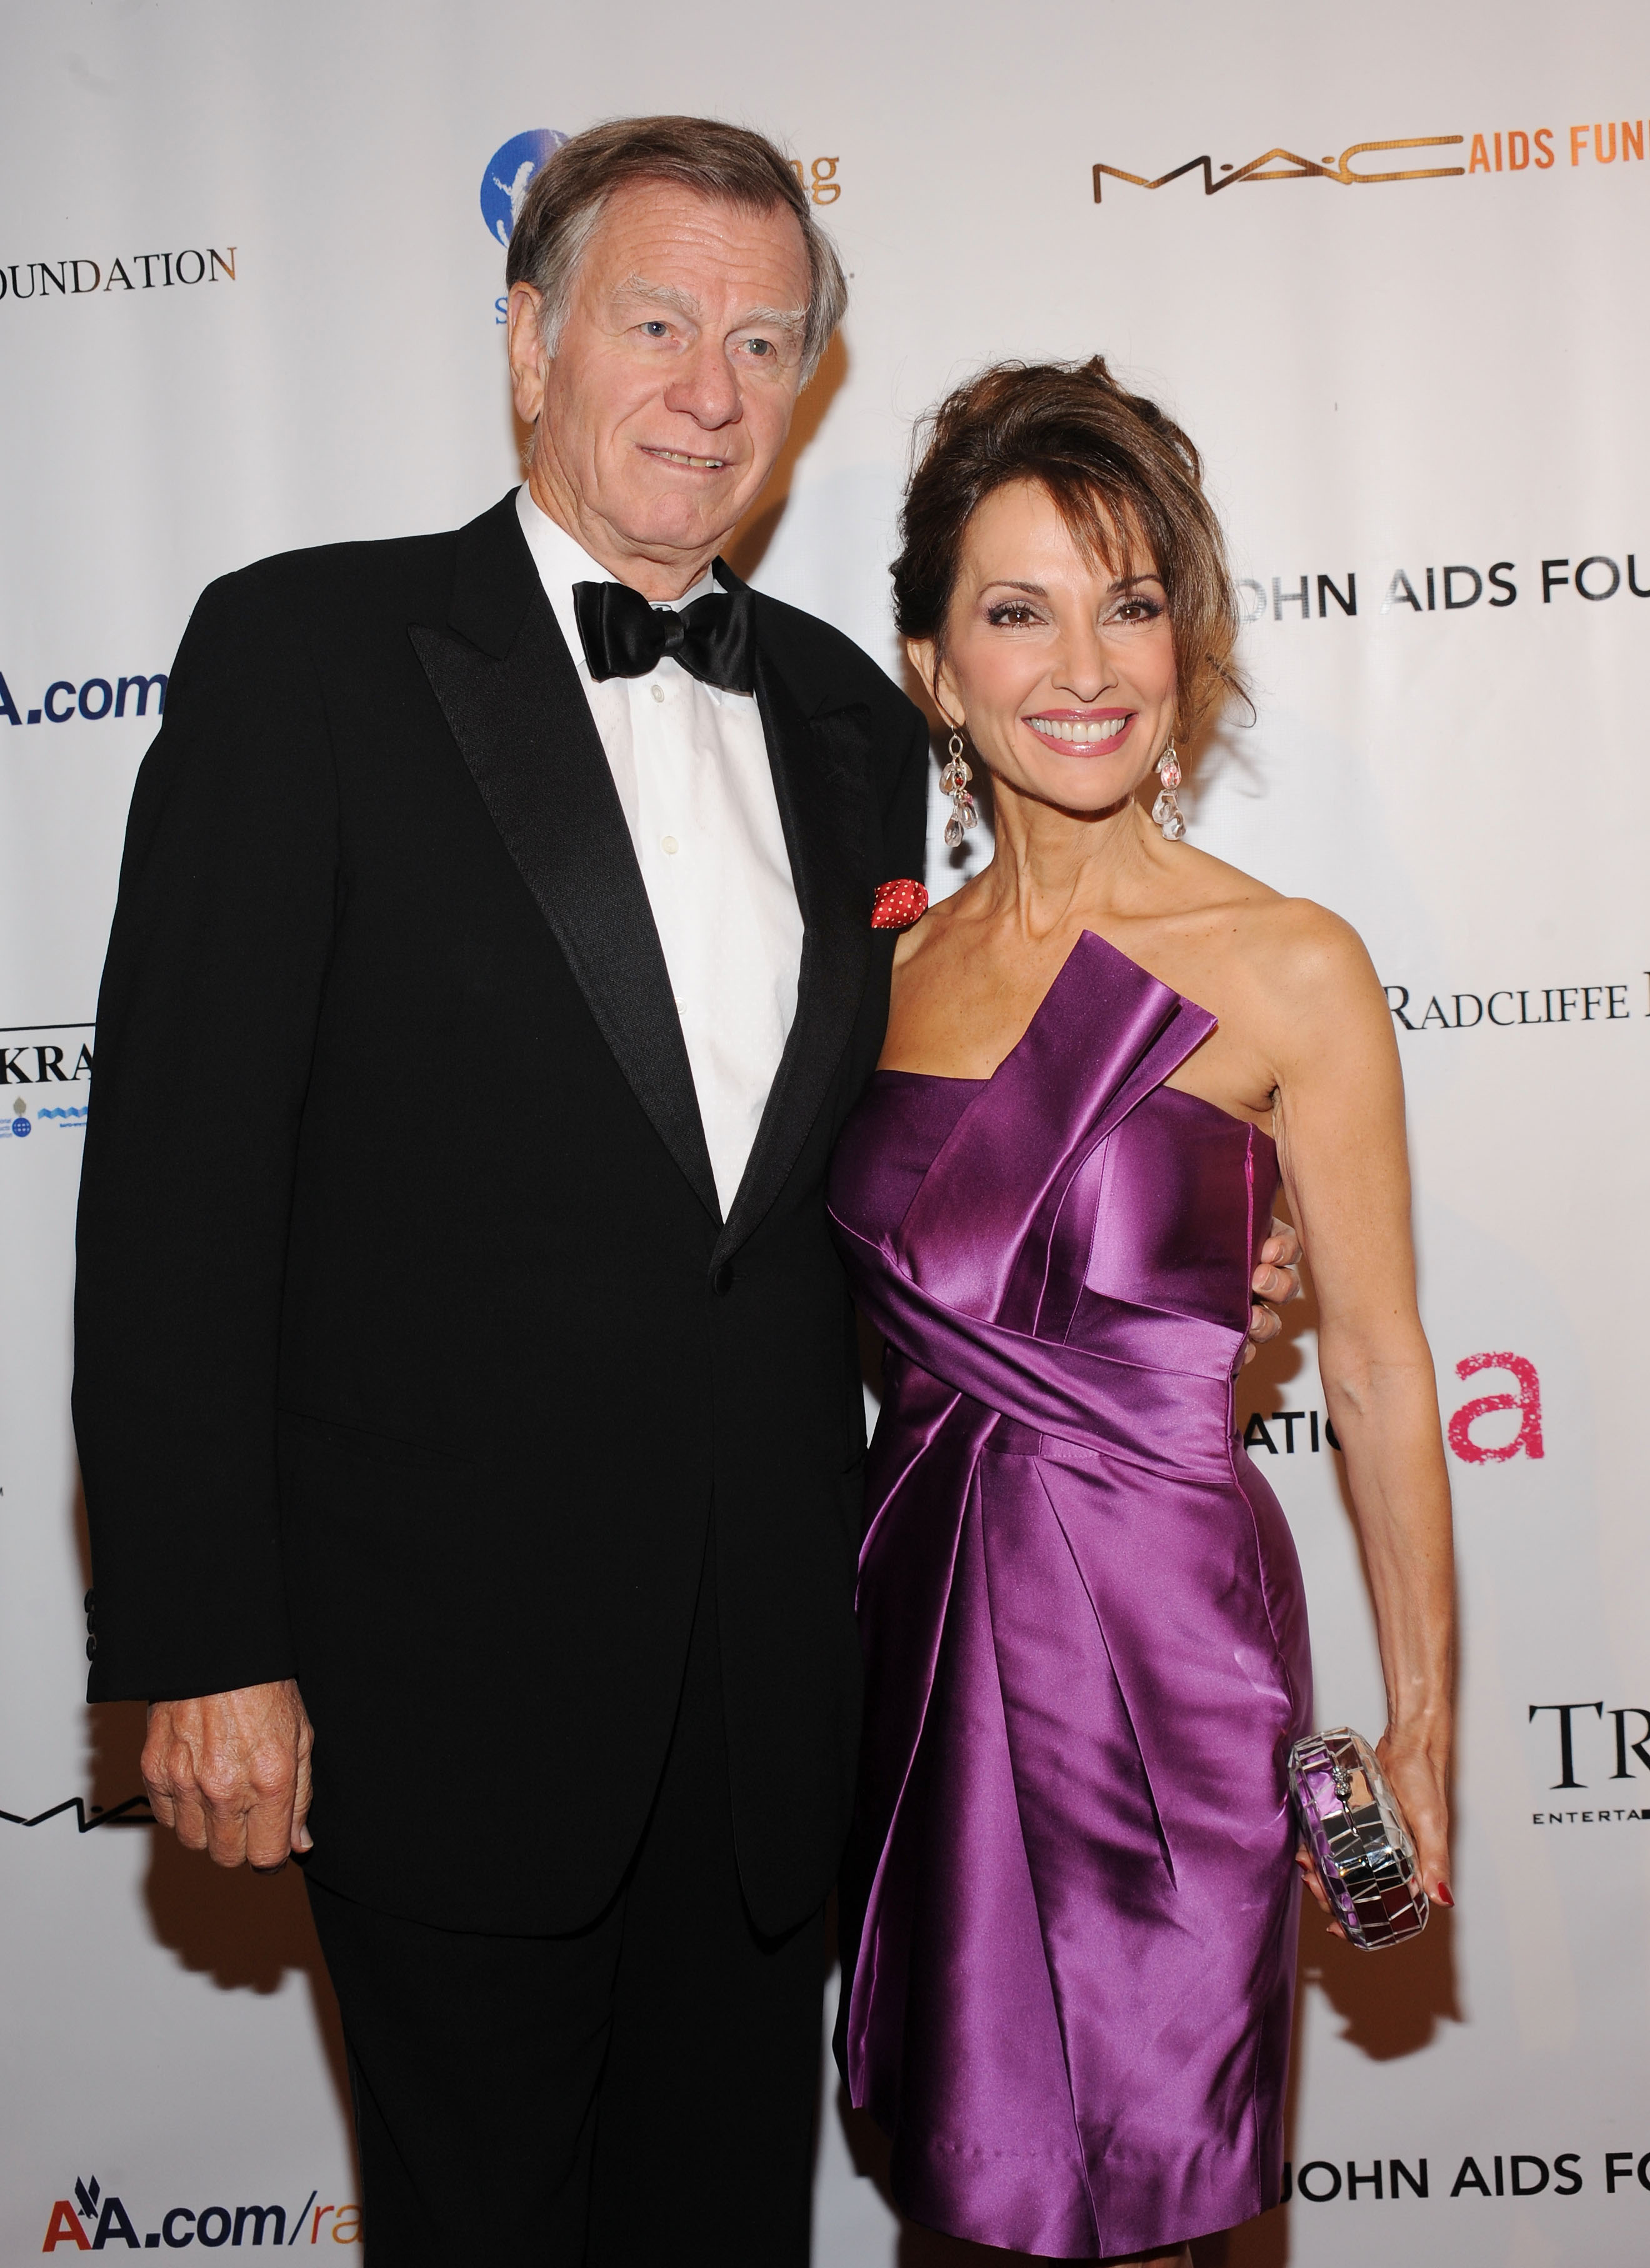 Helmut Huber and Susan Lucci attend the 8th Annual Elton John AIDS Foundation�s "An Enduring Vision" benefit in New York City, on November 16, 2009. | Source: Getty Images